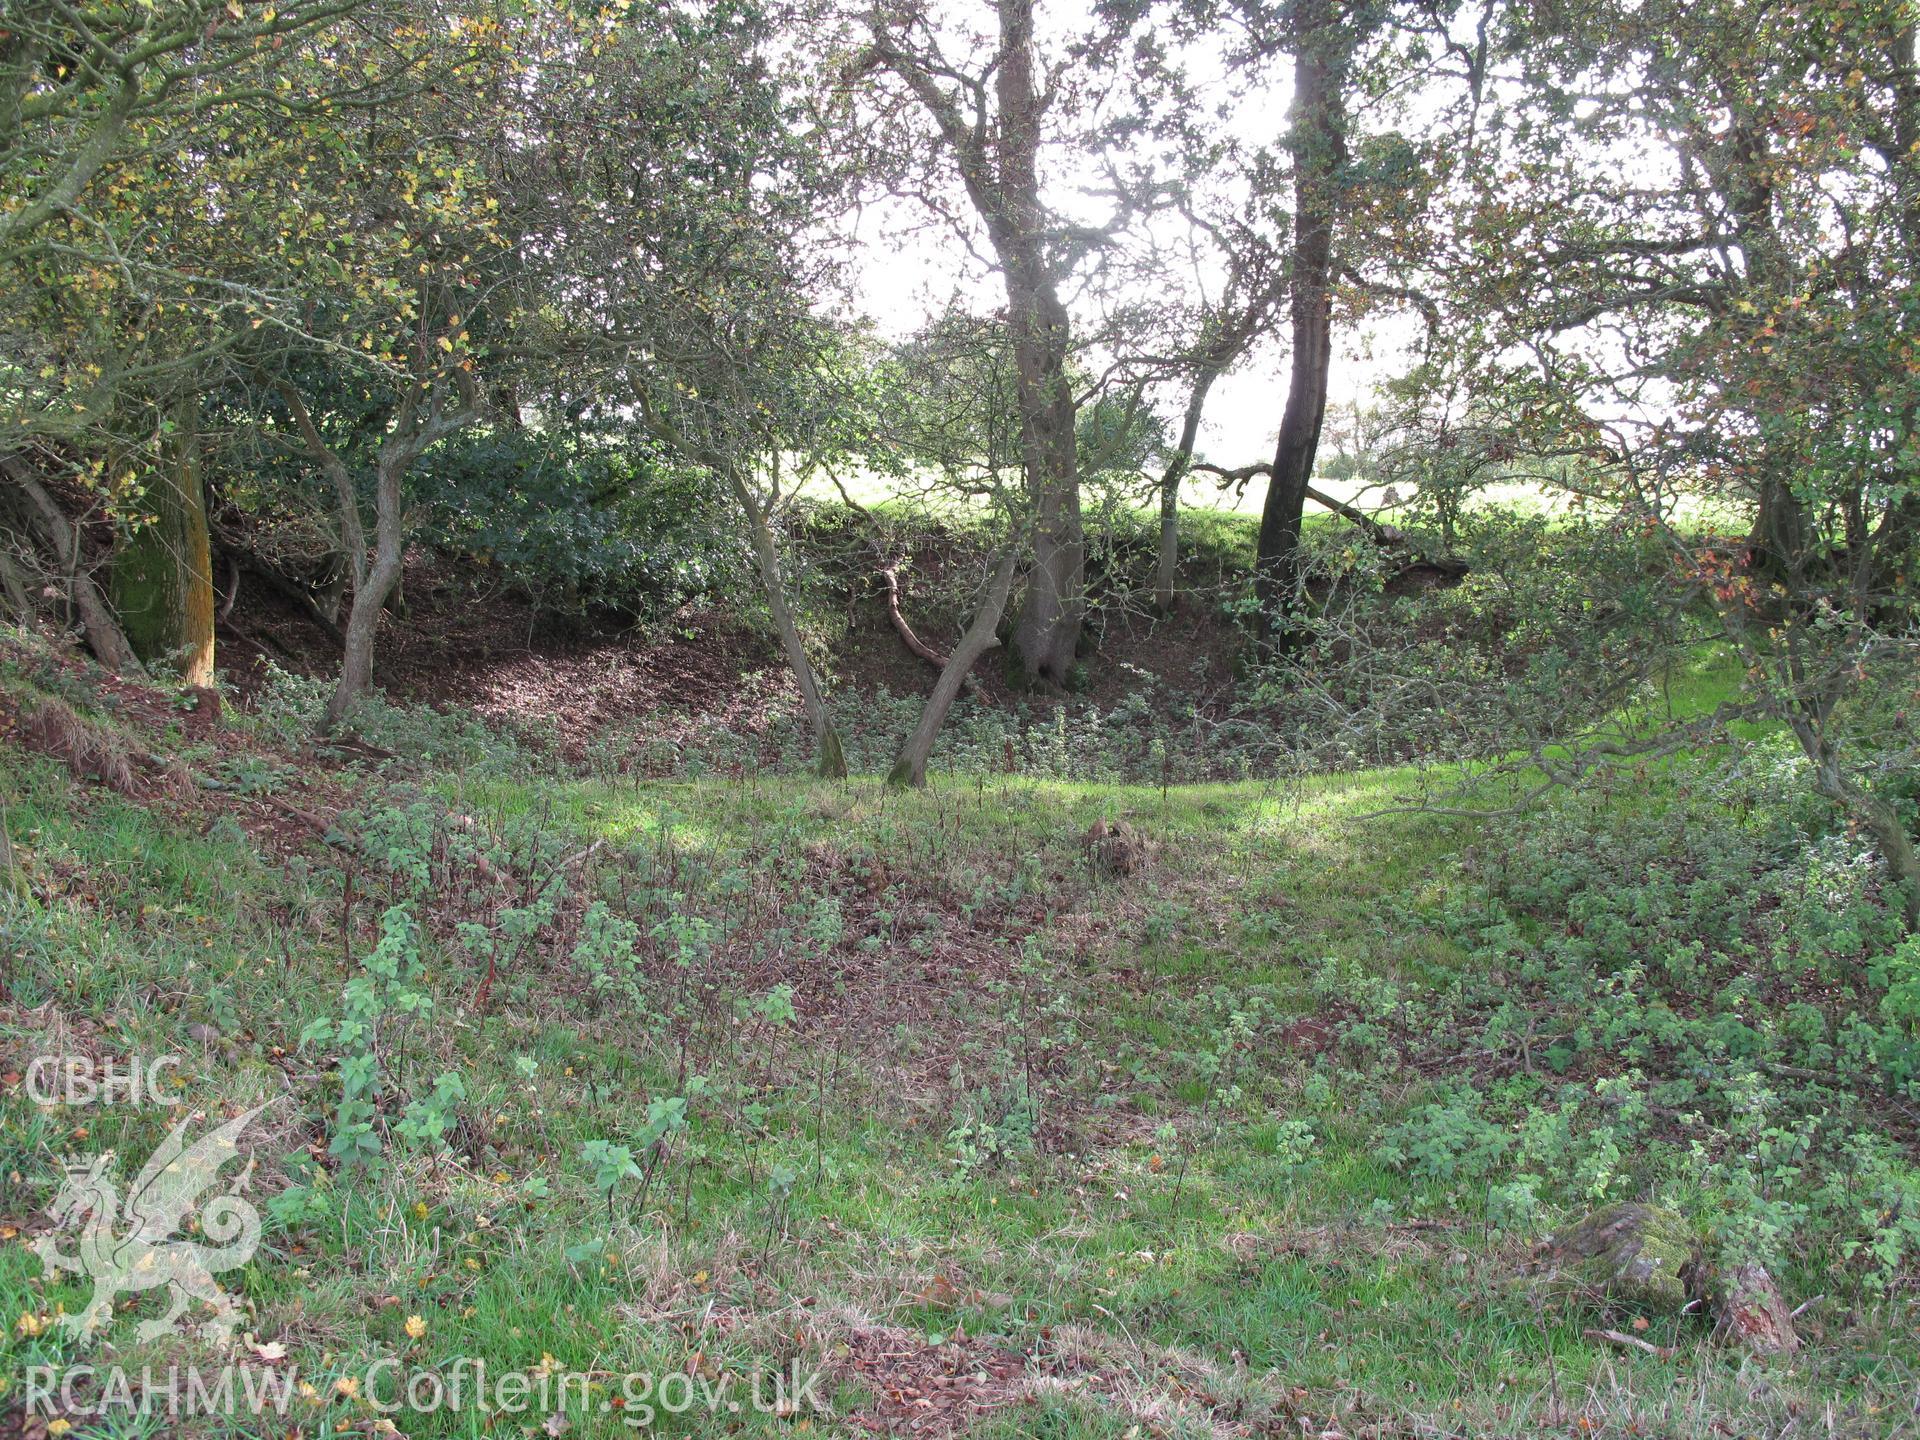 Quarry hollow at Craig-y-dorth from the east, taken by Brian Malaws on 26 September 2011.